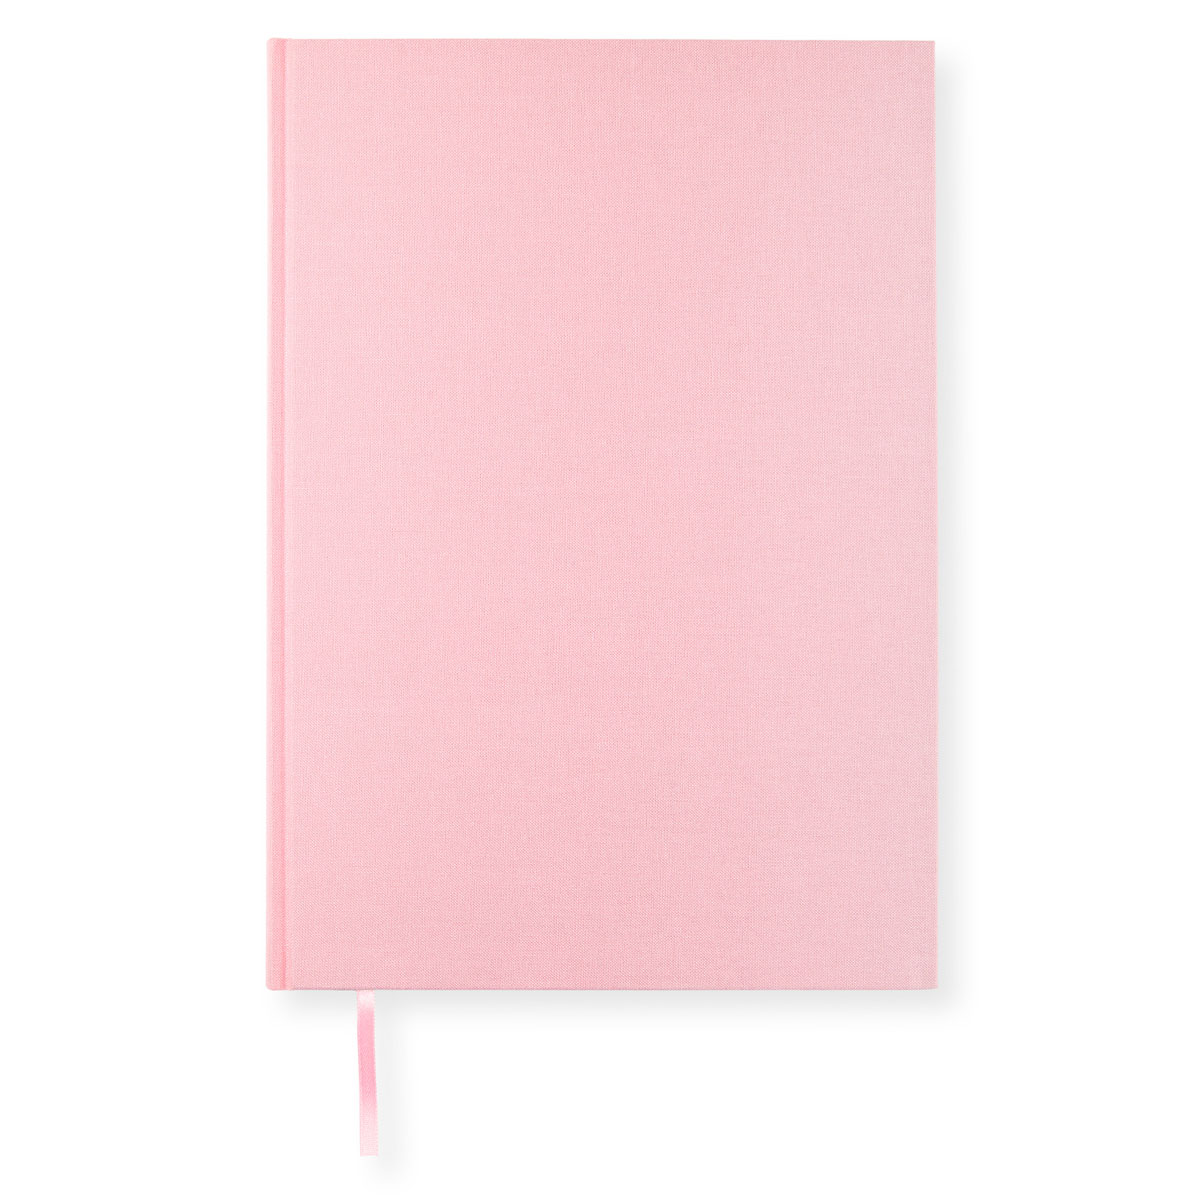 Notebook A4 Ruled Tea Rose in the group Paper & Pads / Note & Memo / Notebooks & Journals at Pen Store (128460)